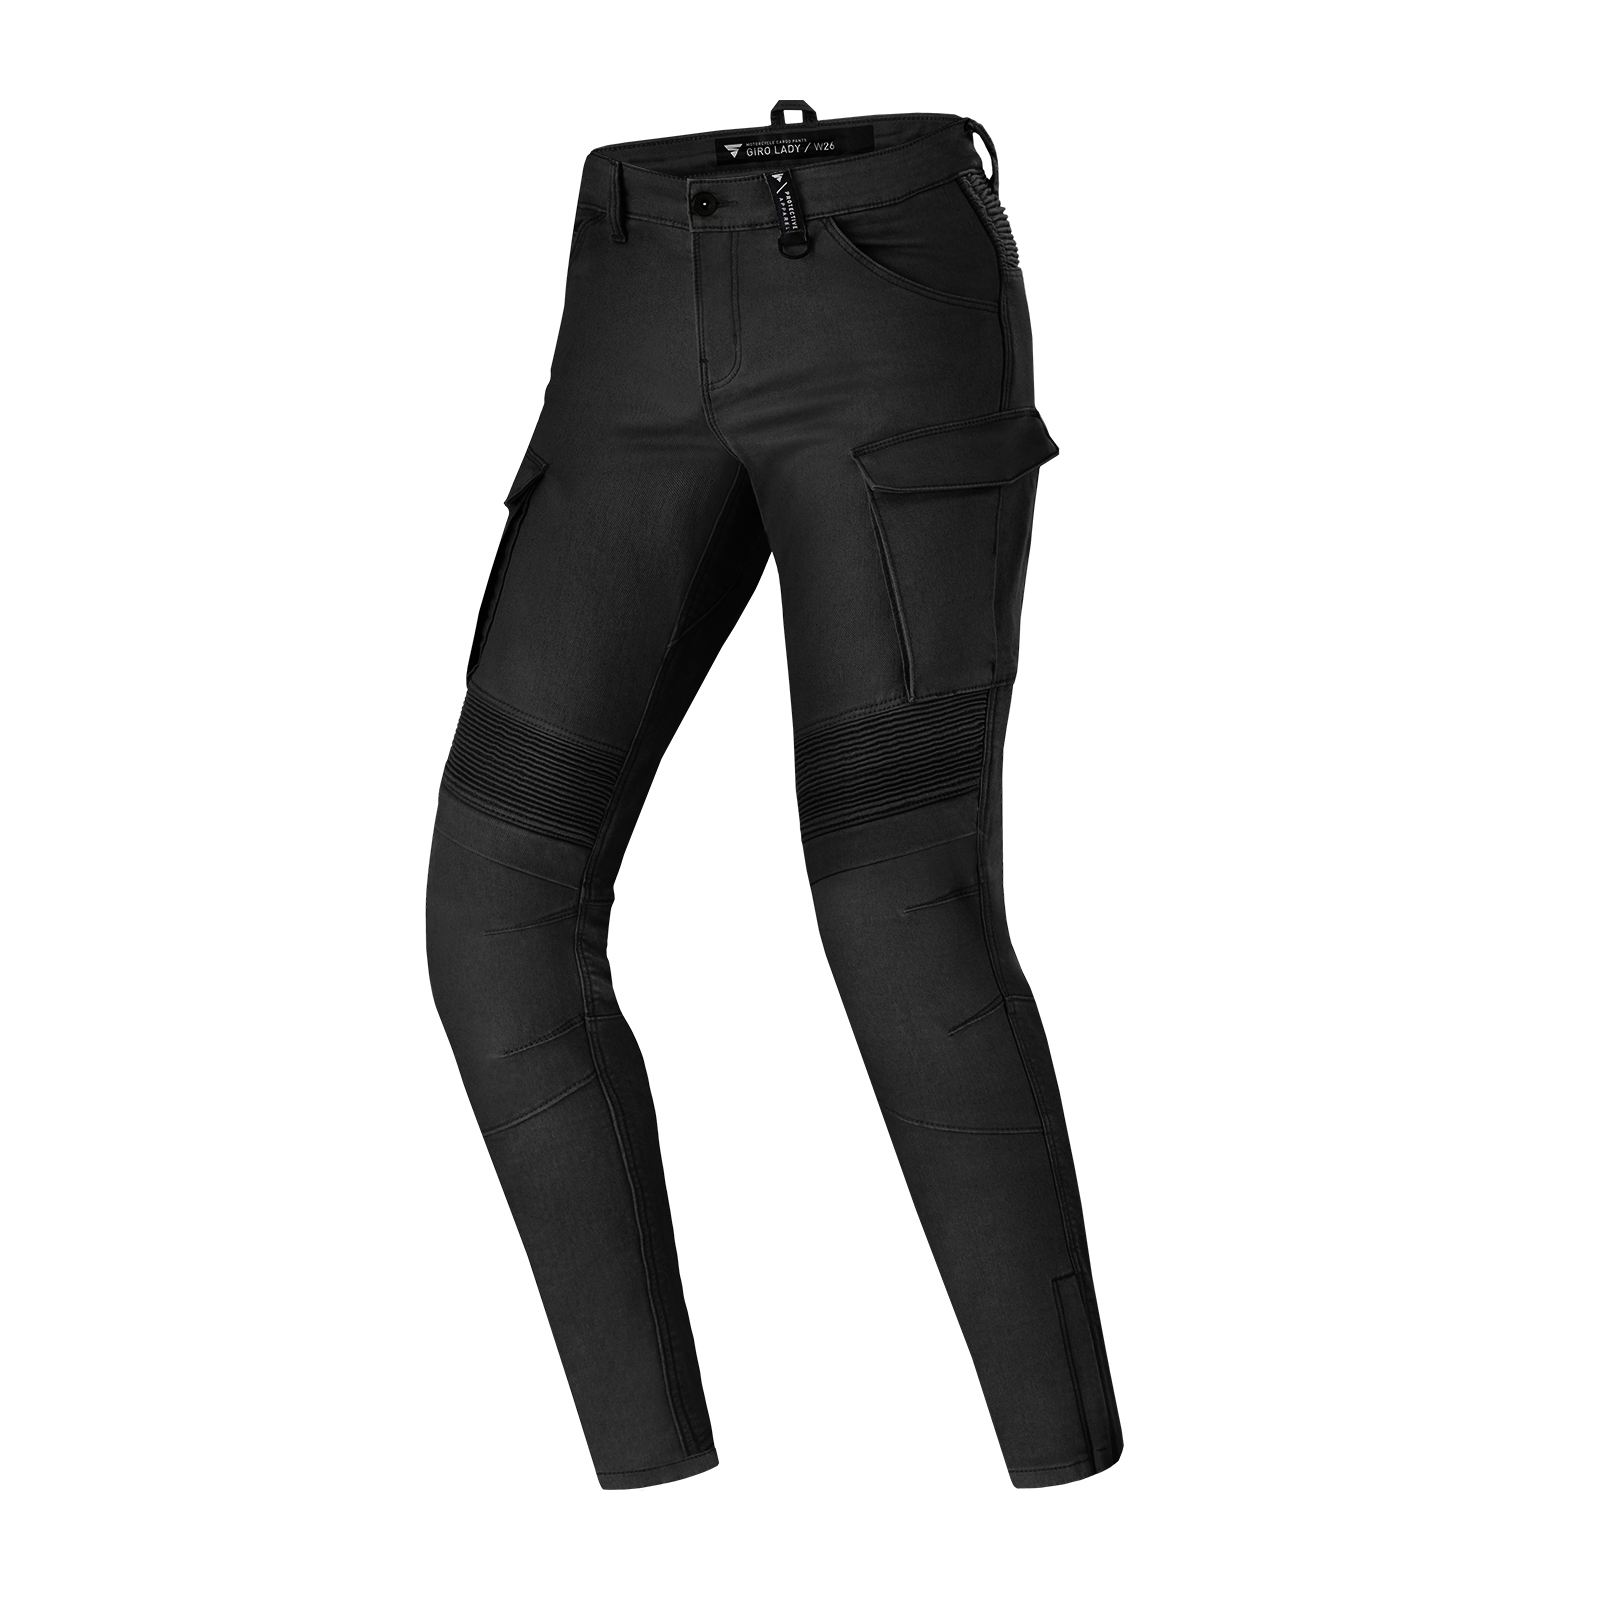  SHIMA Giro 2.0 Lady Motorcycle Pants for Women - Elastic, Slim  Fit, Cargo Biker Trousers Womens with DuraQL Layer, CE Knee and Hip Armor  Pads, Side Pockets (Black, 32) : Clothing